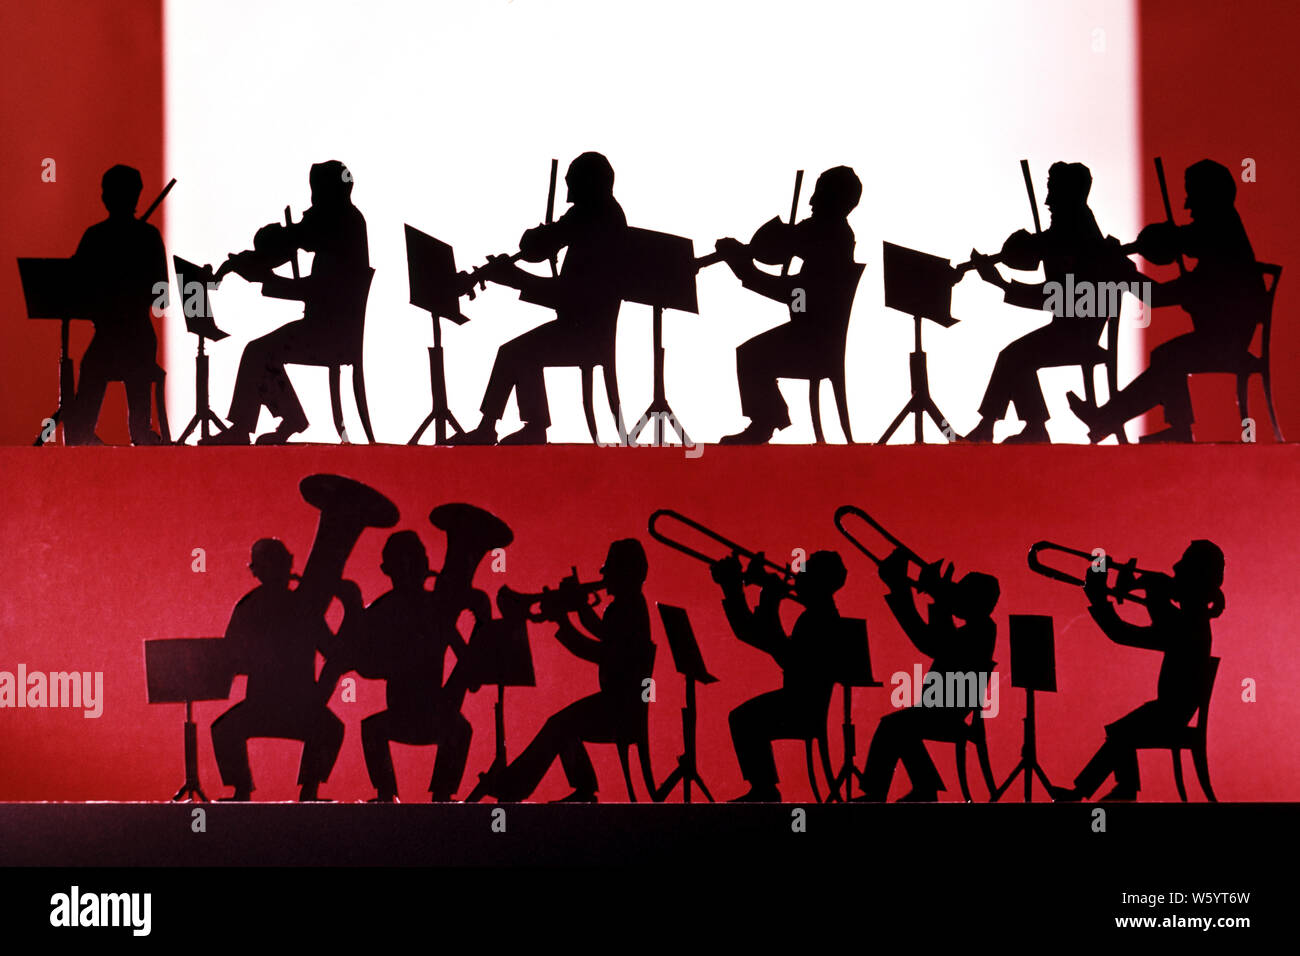 1970s GRAPHIC SILHOUETTED REPRESENTATION OF SEATED 1920s HOT JAZZ BAND OF MUSICIANS PLAYING VIOLINS TUBAS TRUMPETS AND TROMBONES - km7093 PHT001 HARS COPY SPACE FULL-LENGTH PERSONS INSPIRATION MALES PROFESSION ENTERTAINMENT SPIRITUALITY MUSICIANS PERFORMING PERFORMING ARTS WIDE ANGLE SKILL OCCUPATION HAPPINESS SKILLS LEISURE STRENGTH SILHOUETTED AND CAREERS EXCITEMENT POWERFUL RECREATION OF AUTHORITY OCCUPATIONS VIOLINS BANDSTAND TUBAS CONCEPTUAL STYLISH ANONYMOUS COOPERATION MID-ADULT MID-ADULT MAN TOGETHERNESS 12 OLD FASHIONED REPRESENTATION TRUMPETS TWELVE Stock Photo